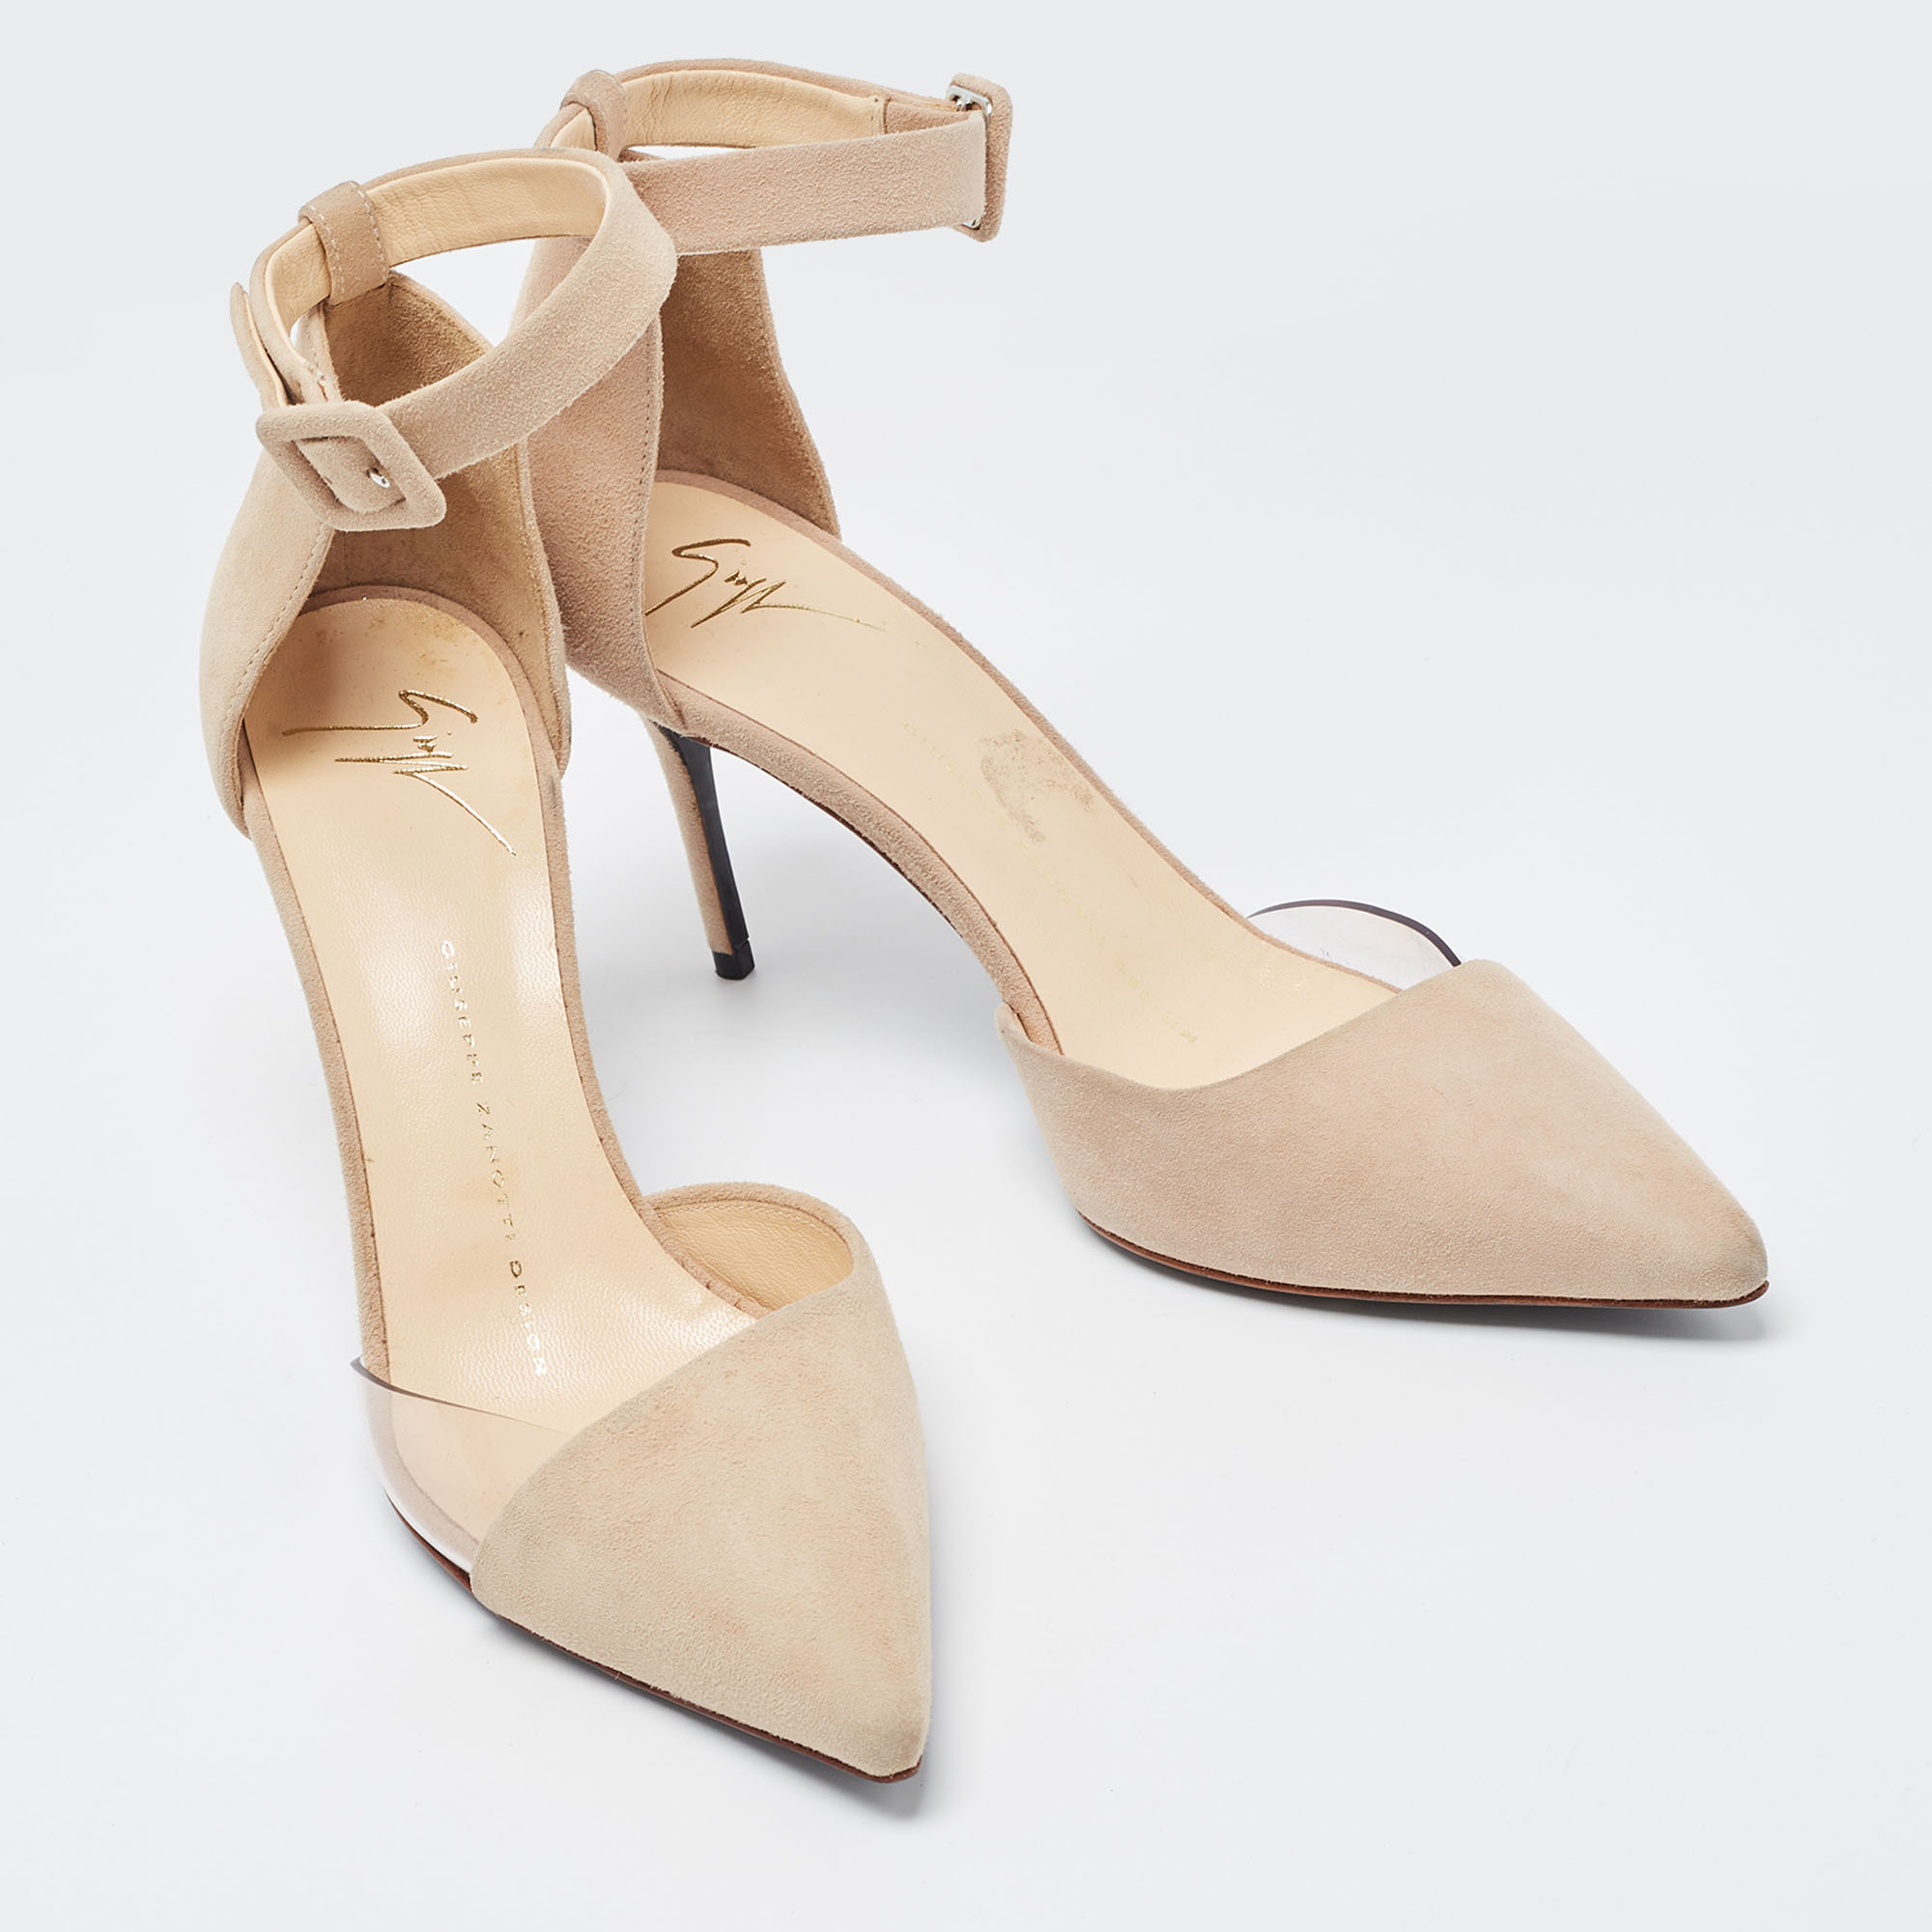 Giuseppe Zanotti Beige PVC And Suede Ankle Strap Pumps Size 36.5